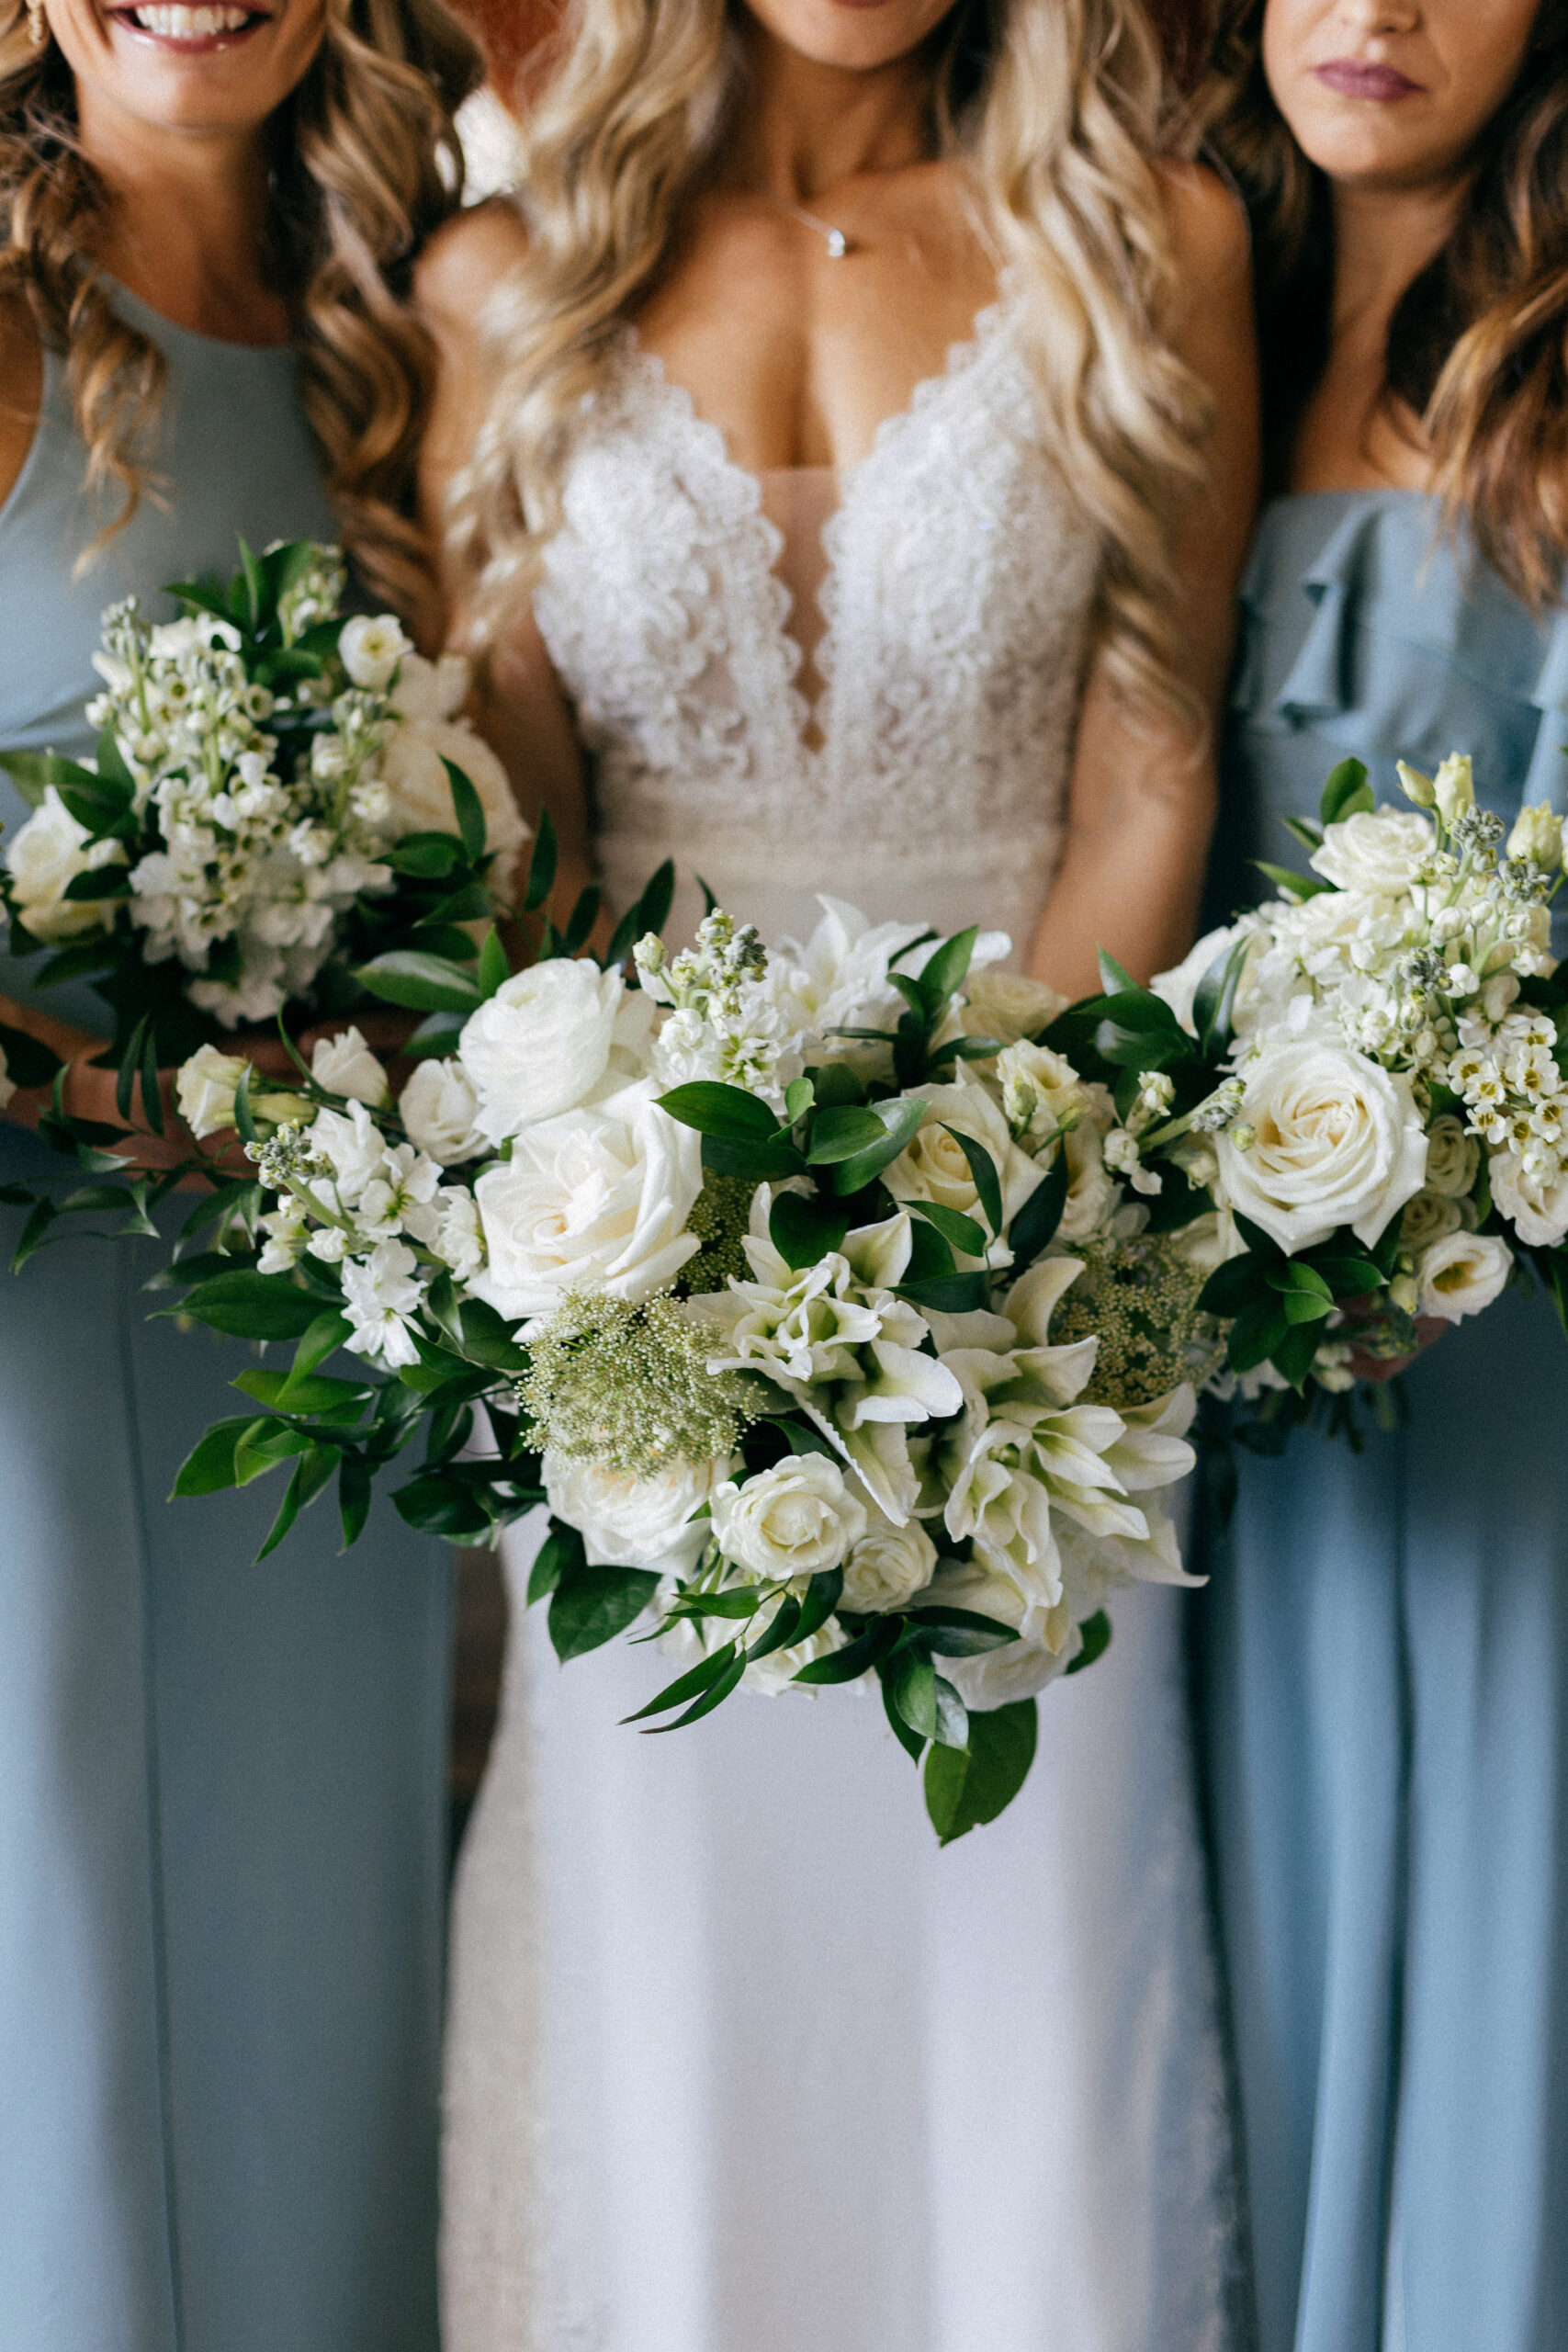 Whimsical White Rose Calla Lily and Greenery Bridal Bouquet Inspiration | Tampa Bay Florist Bruce Wayne Florals